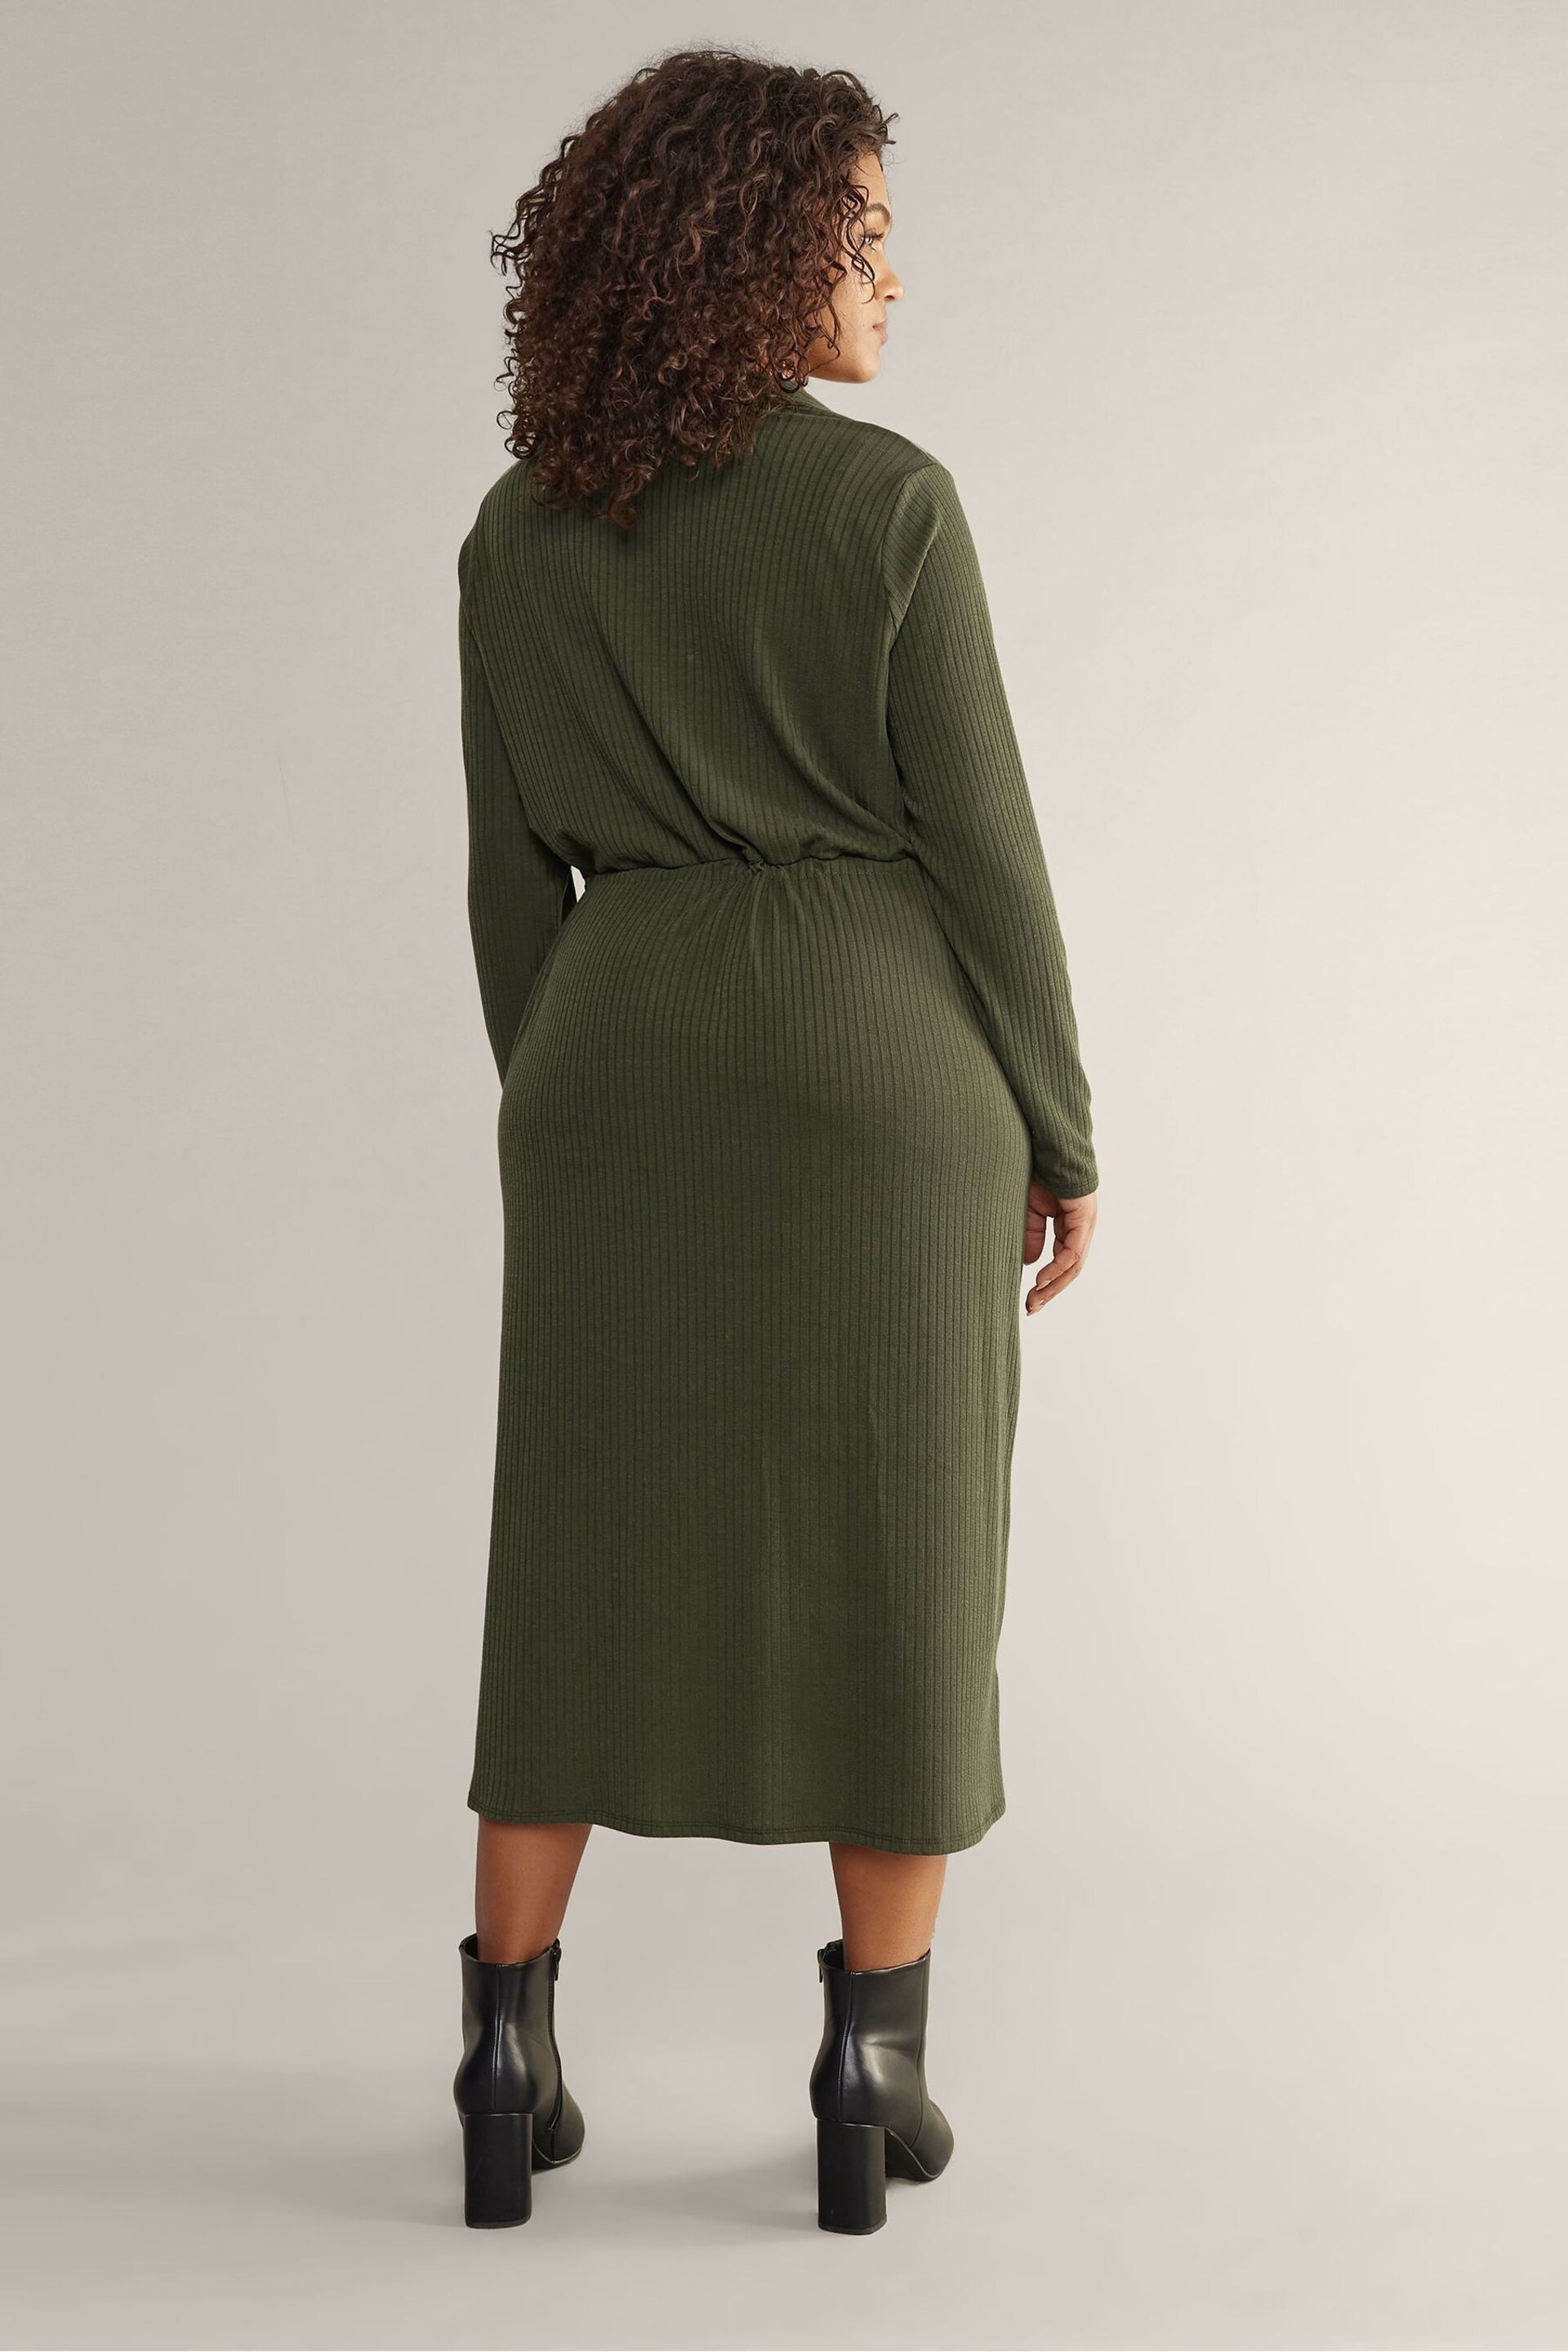 Evans Ribbed Utility Dress - Image 3 of 4